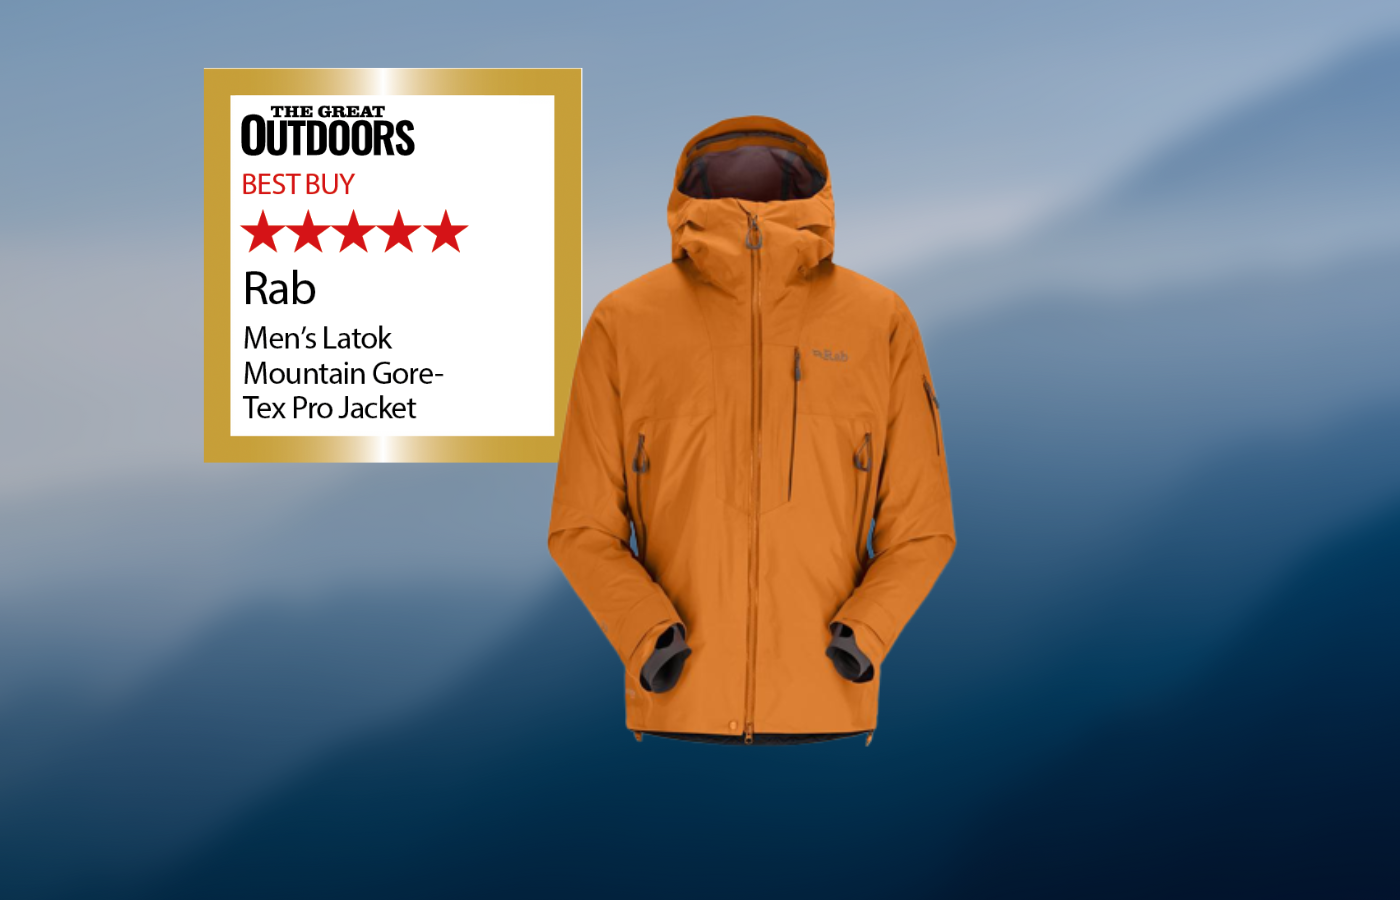 Everything To Consider Before Buying A Waterproof Jacket